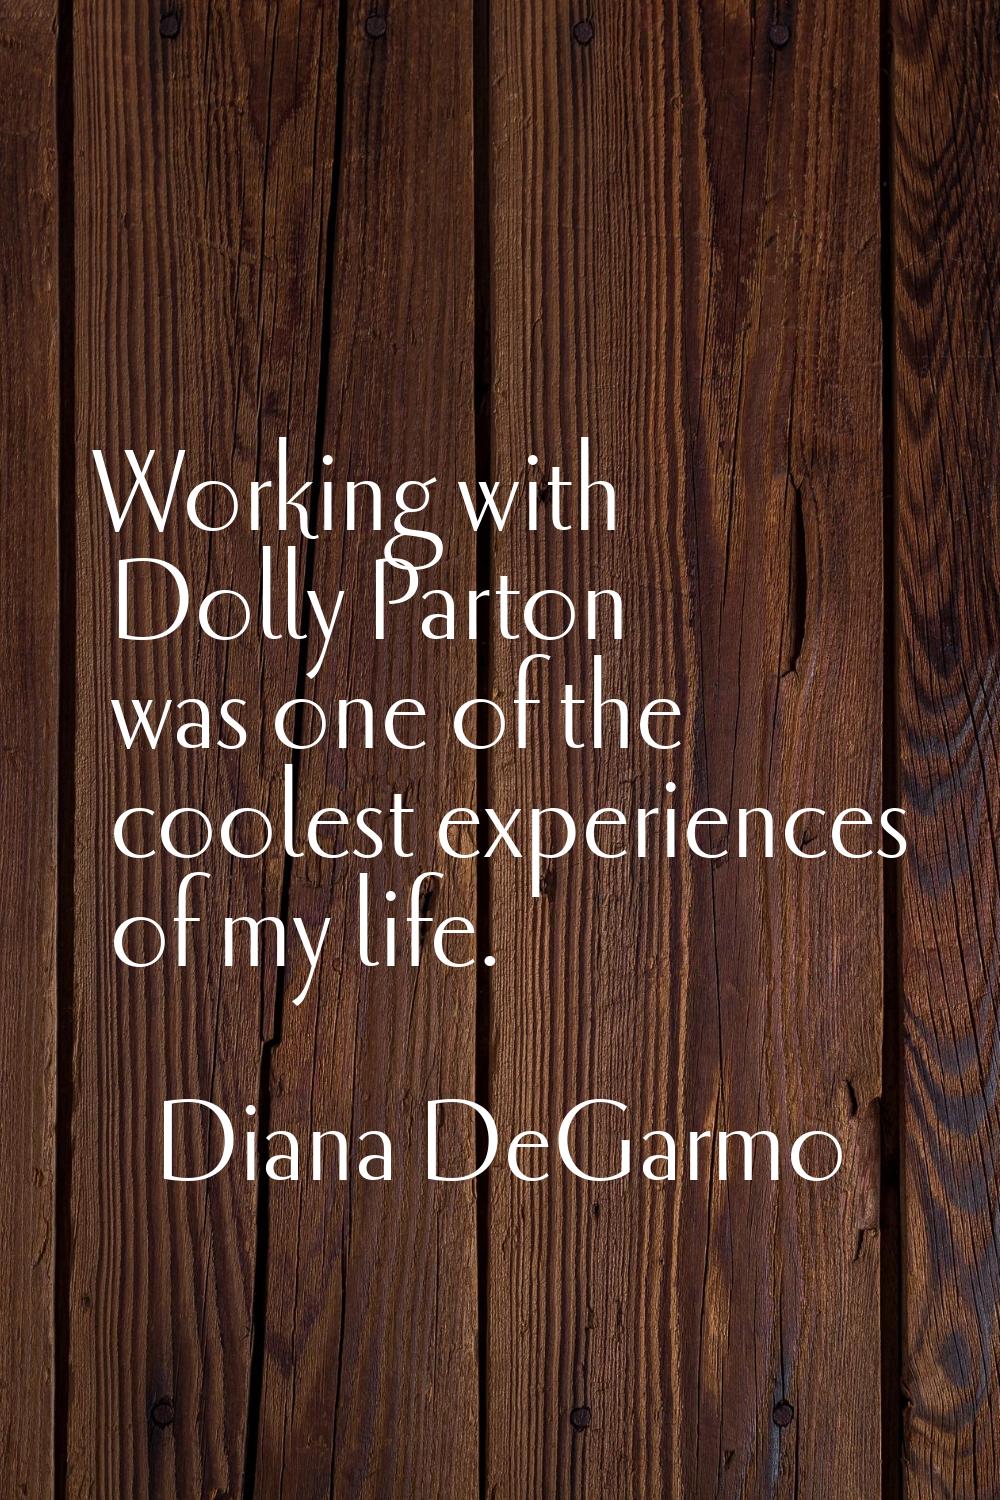 Working with Dolly Parton was one of the coolest experiences of my life.